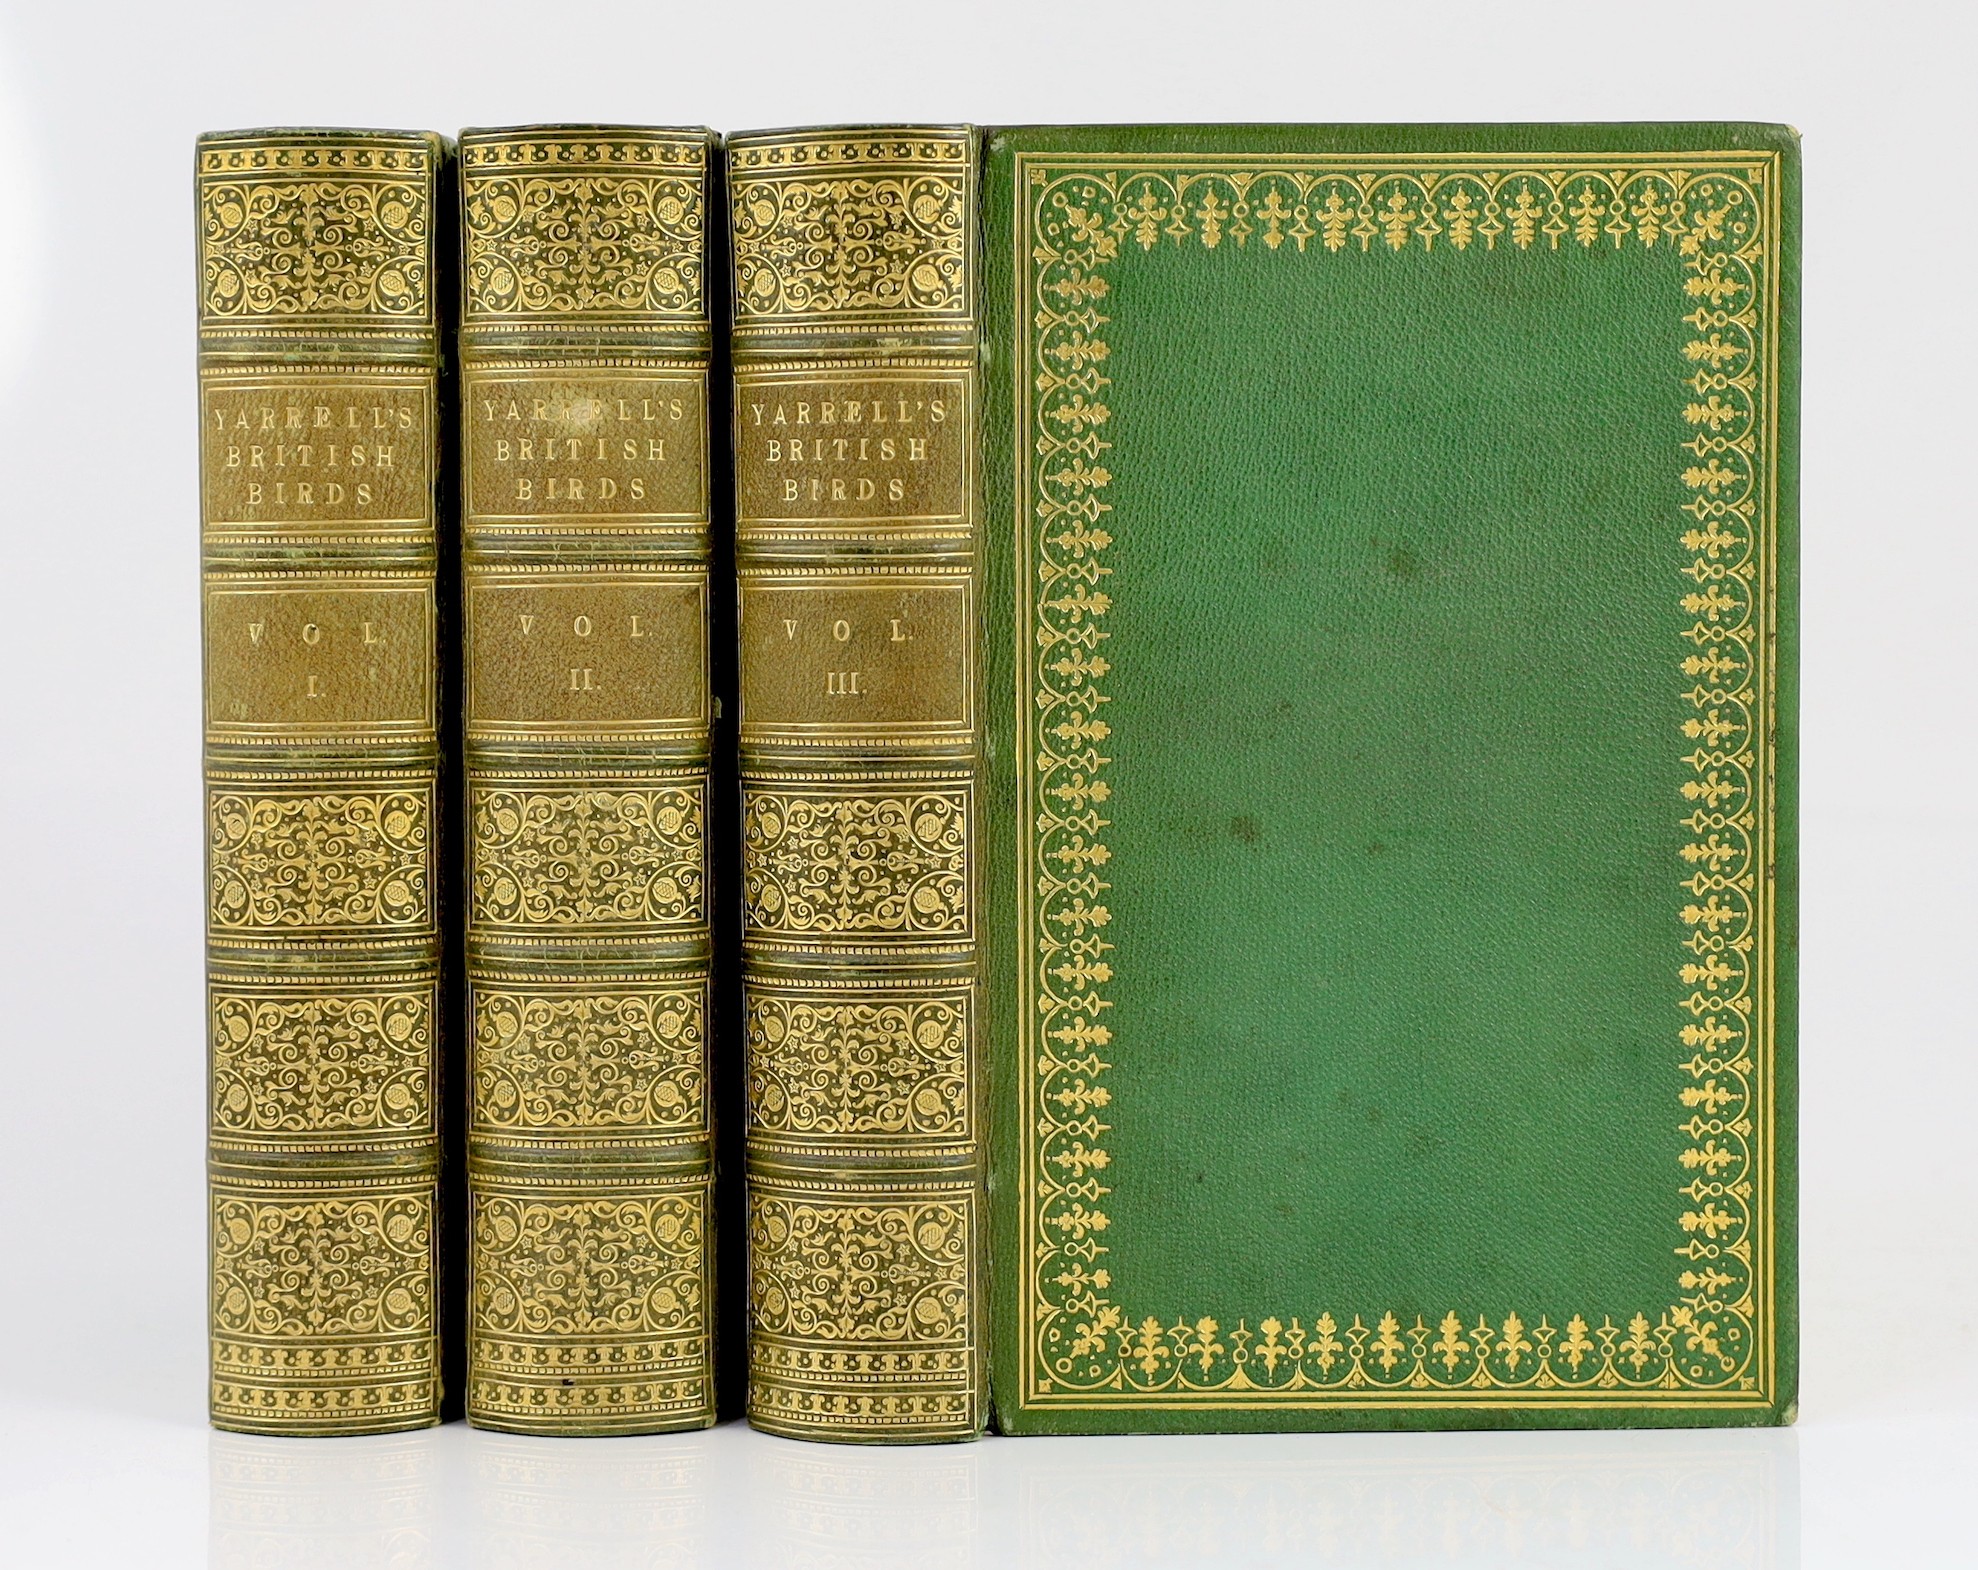 Yarrell, William - A History of British Birds, 3rd edition, with many additions, 3 vols. illus. throughout with wood-engravings; contemp. gilt extra decorated green morocco, panelled spines, ge. & gilt turn-ins, 1856